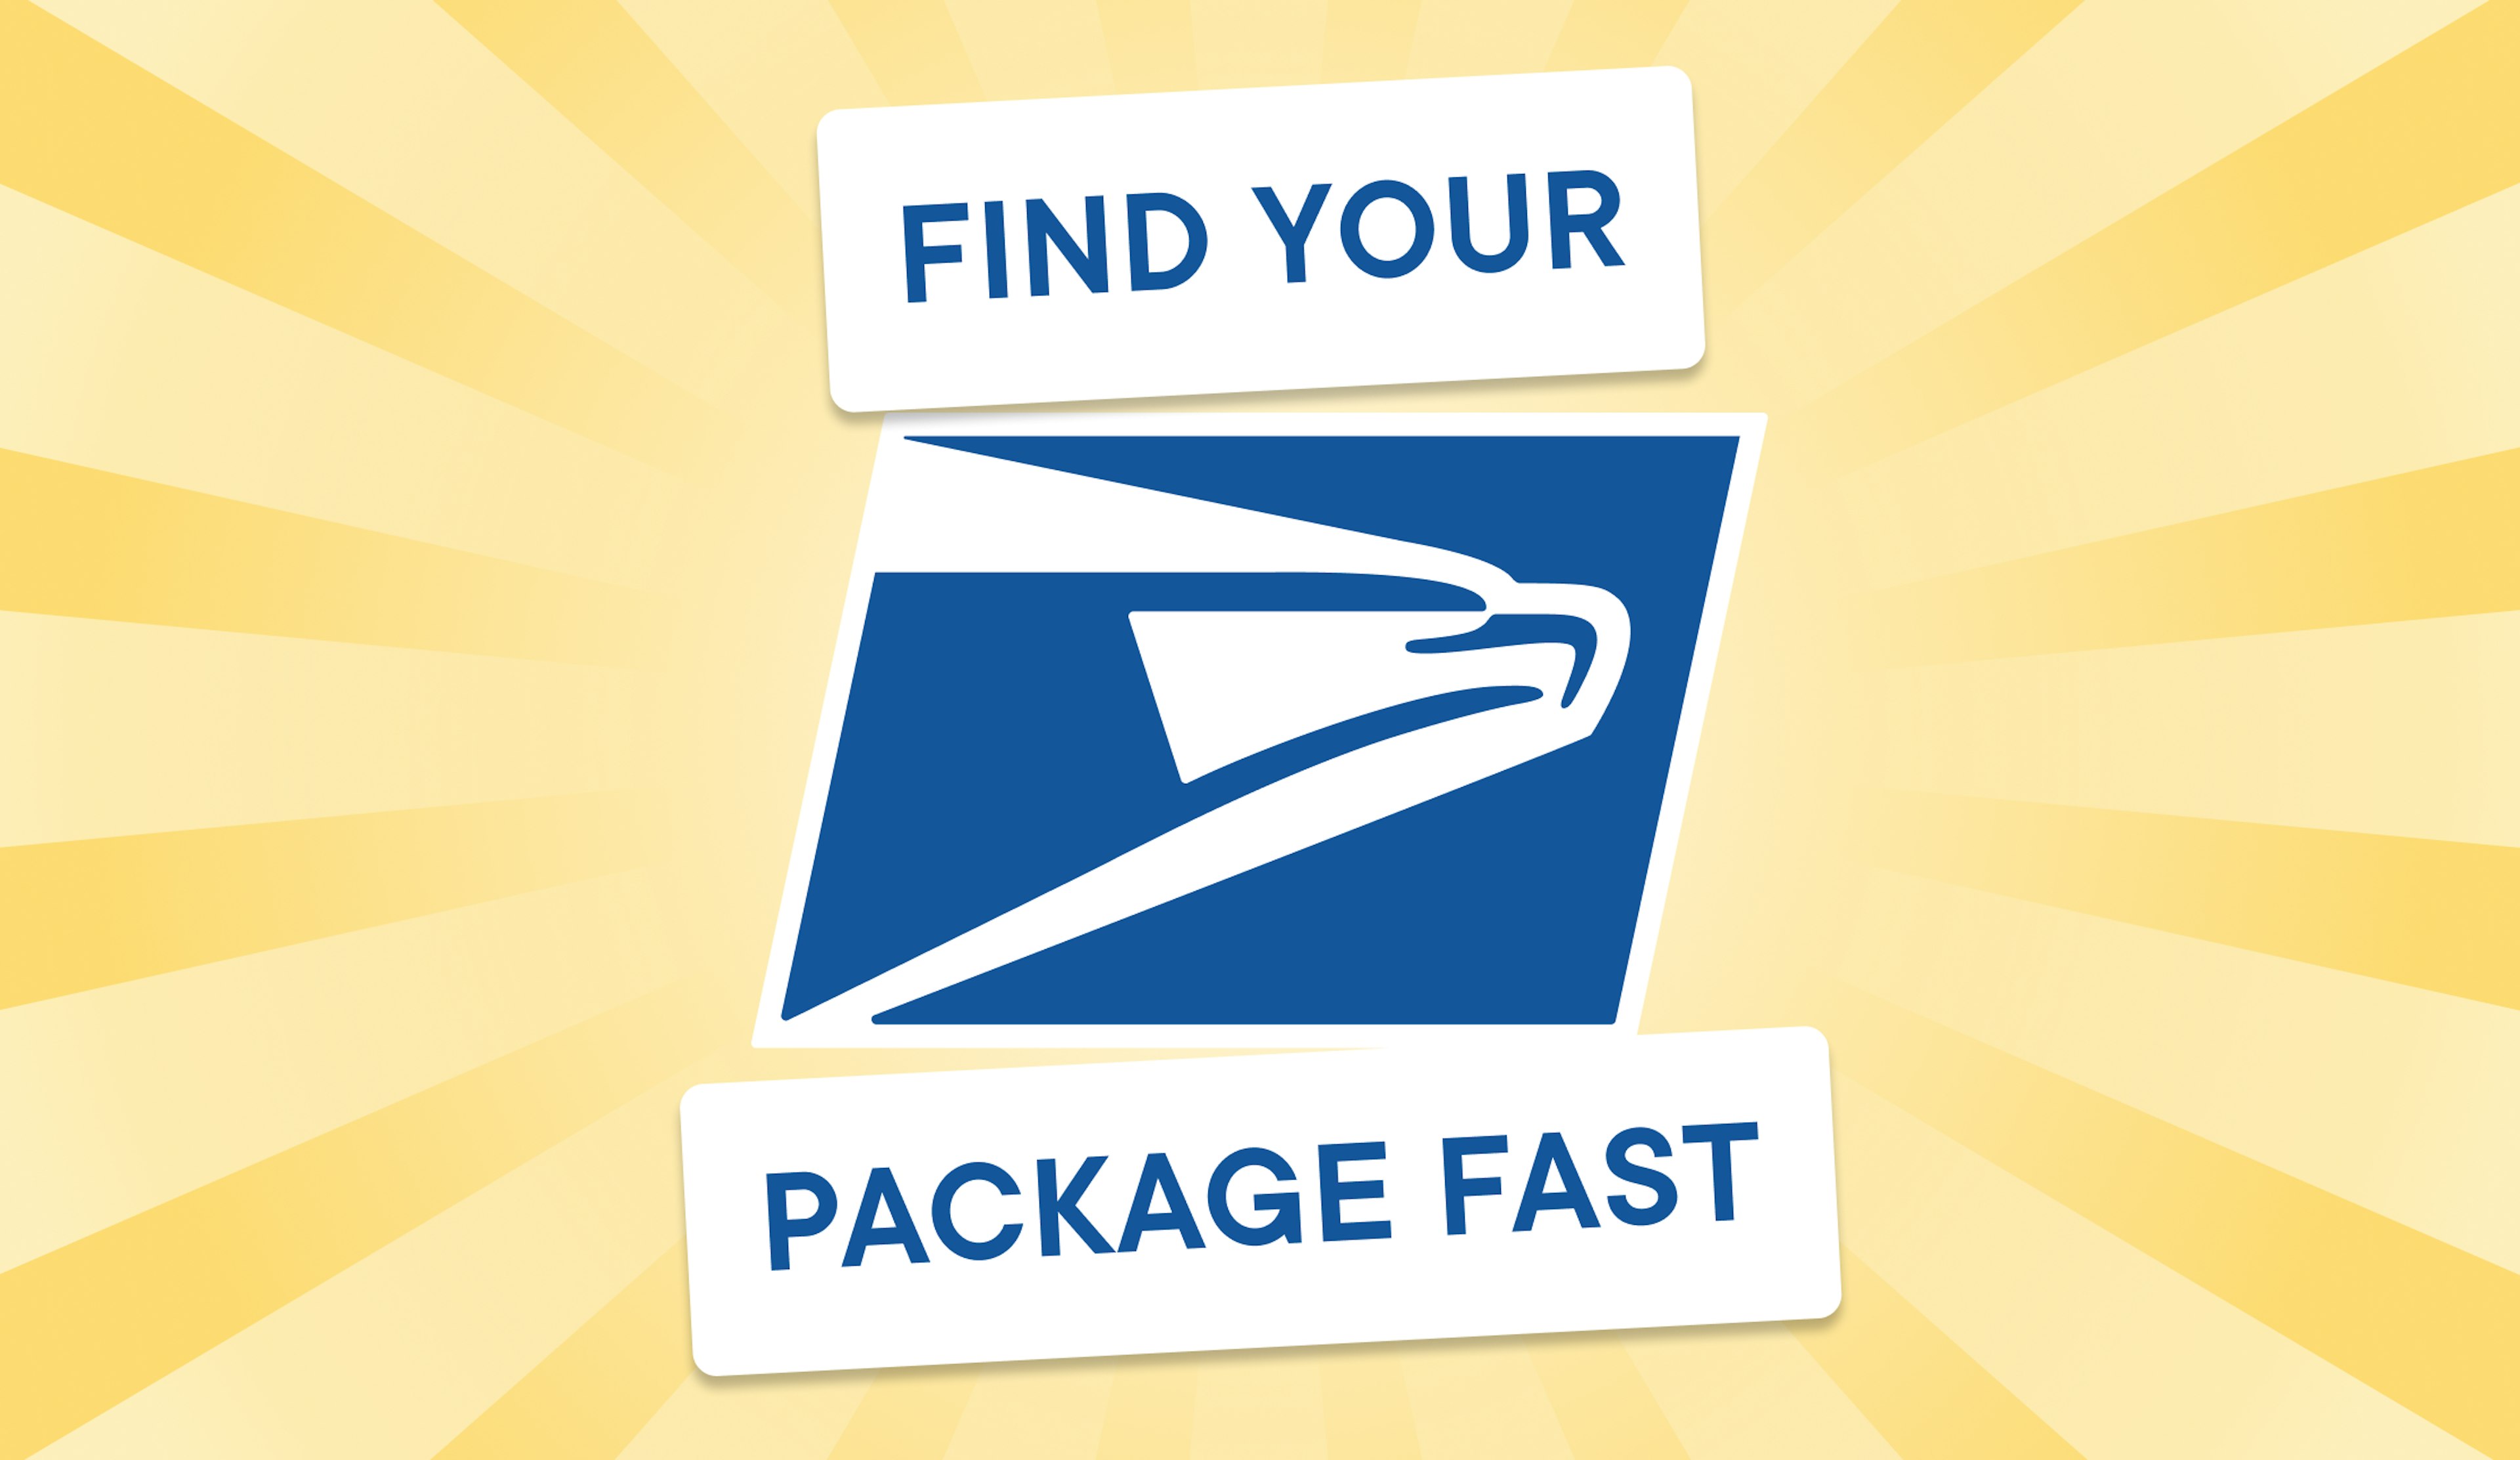 Postal mailing tubes are the advantages in the United Kingdom